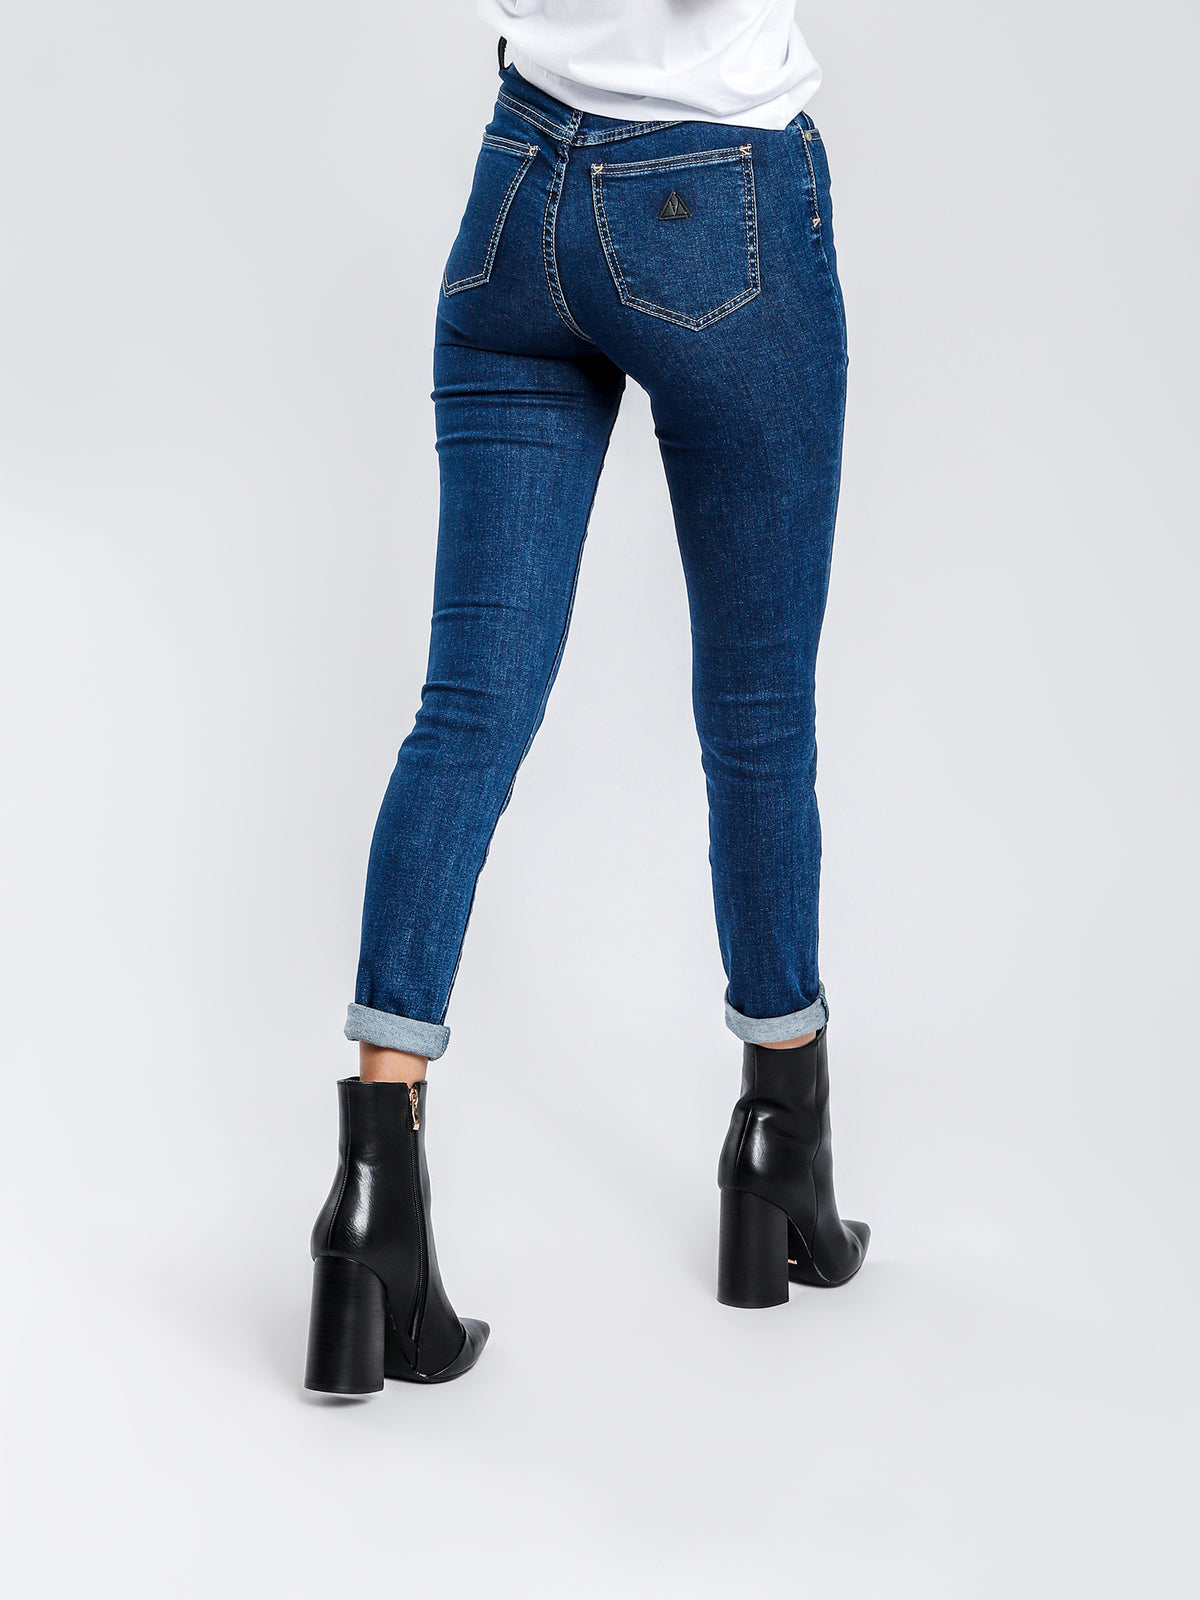 A High Skinny Ankle Basher Jeans in Blue Denim